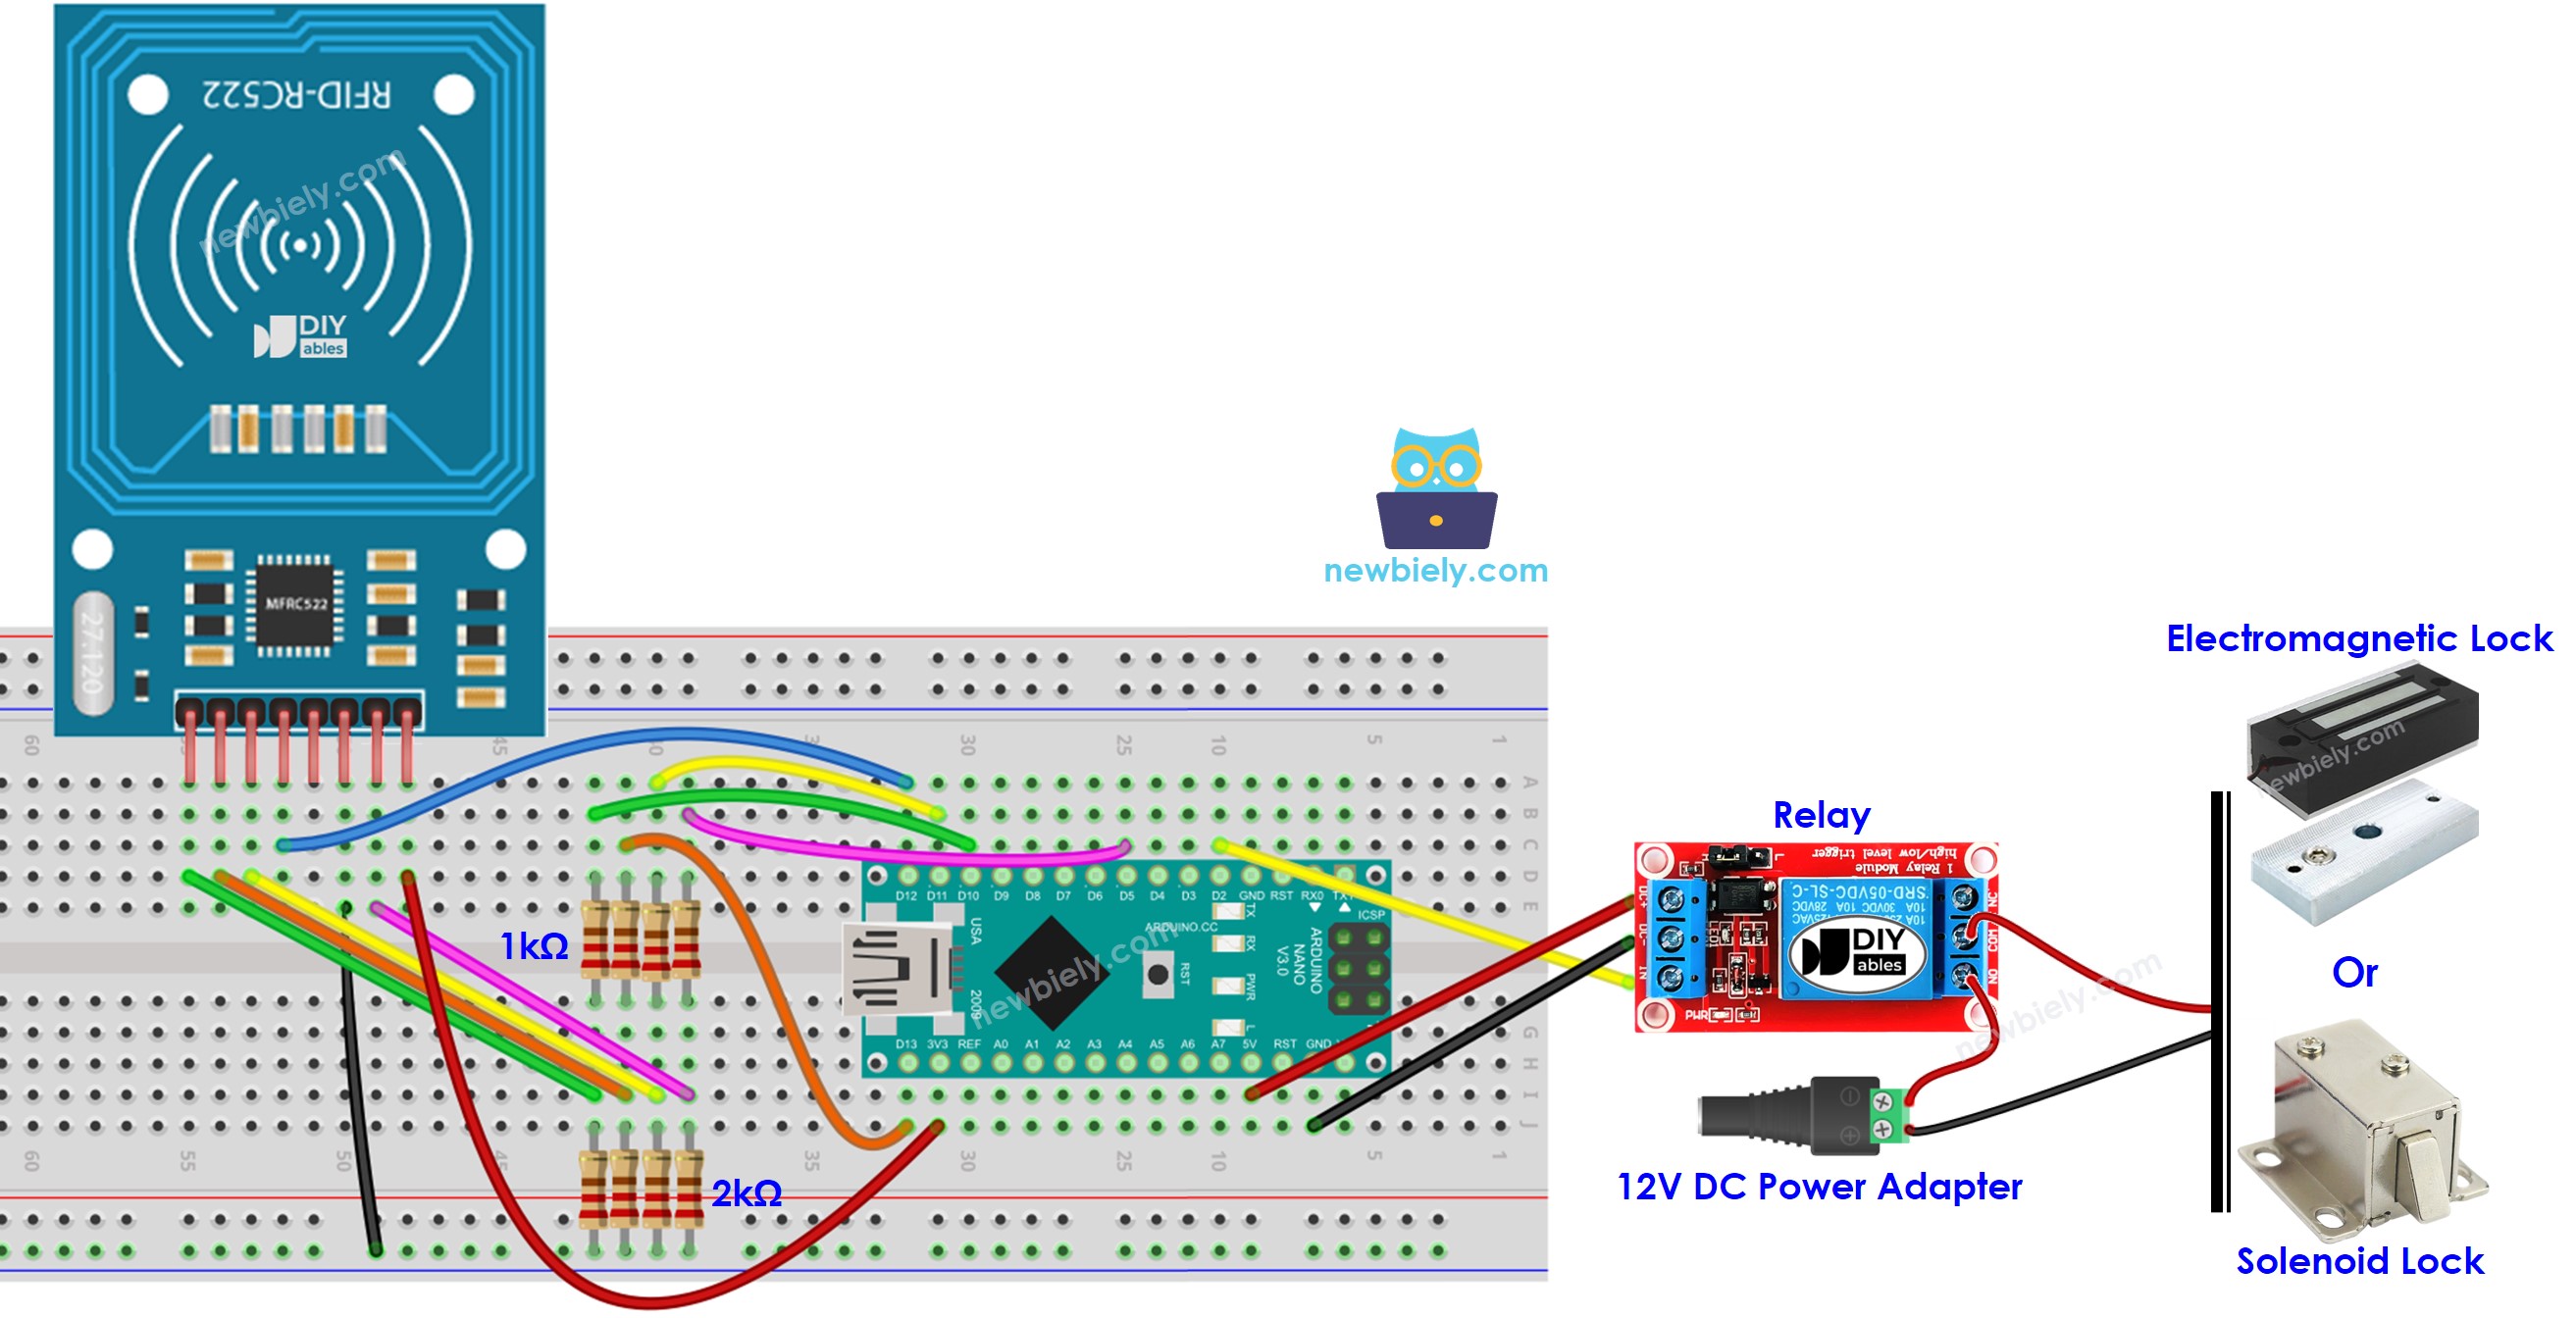 The wiring diagram between Arduino Nano and RFID RC522 with voltage regulated